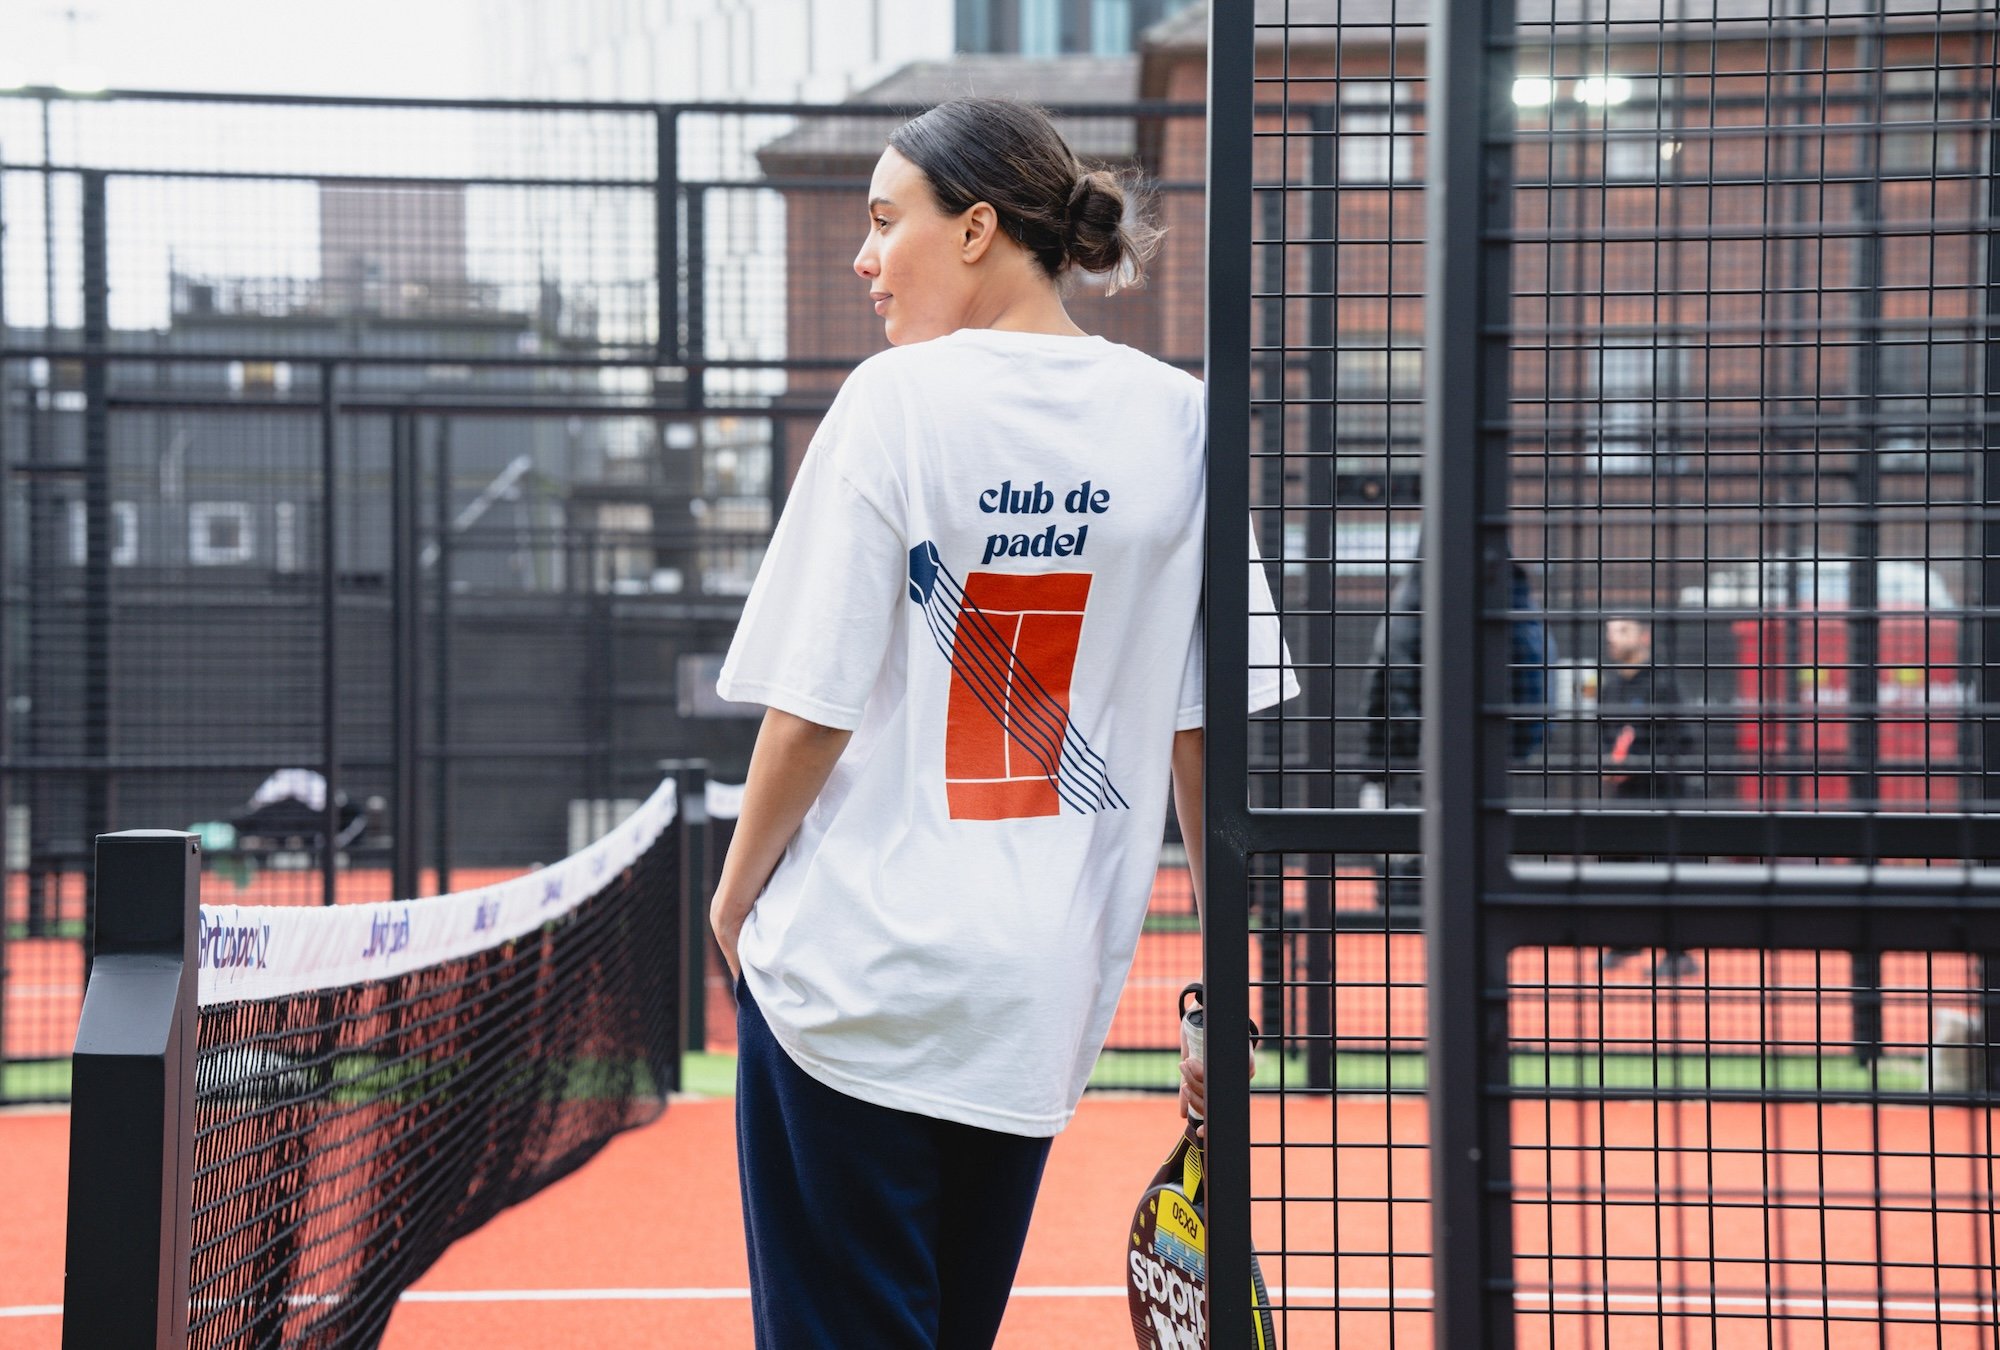 Club De Padel has recently opened at New Jackson and is one of the unique sports you can play in Manchester